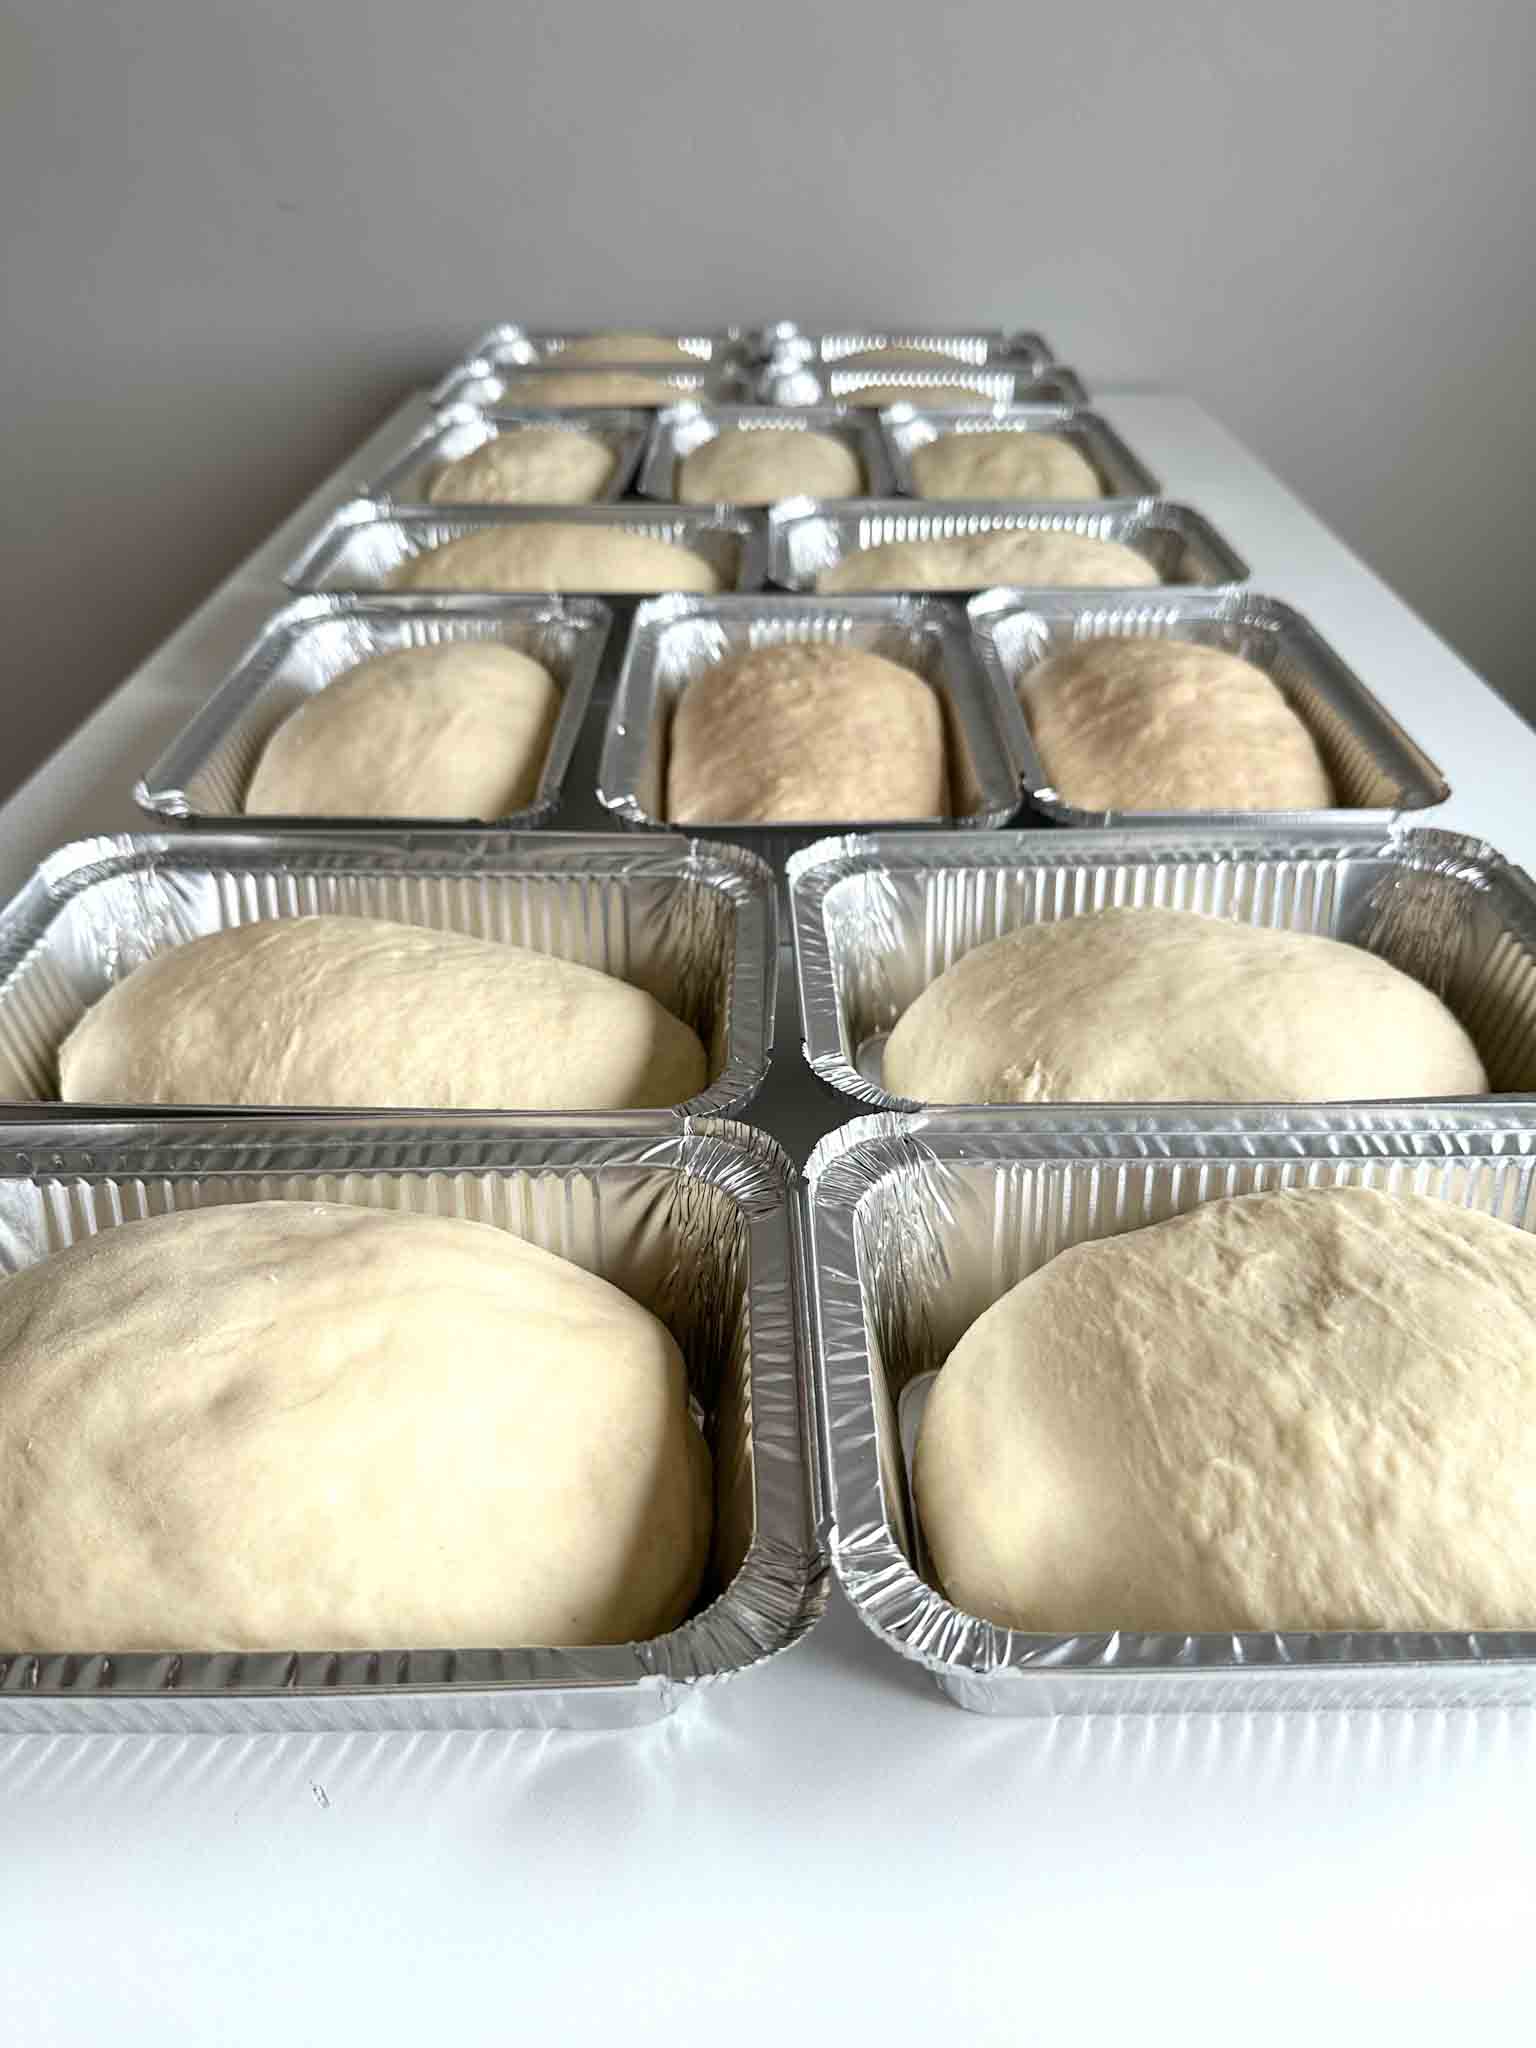 proofed bread dough in loaf pans